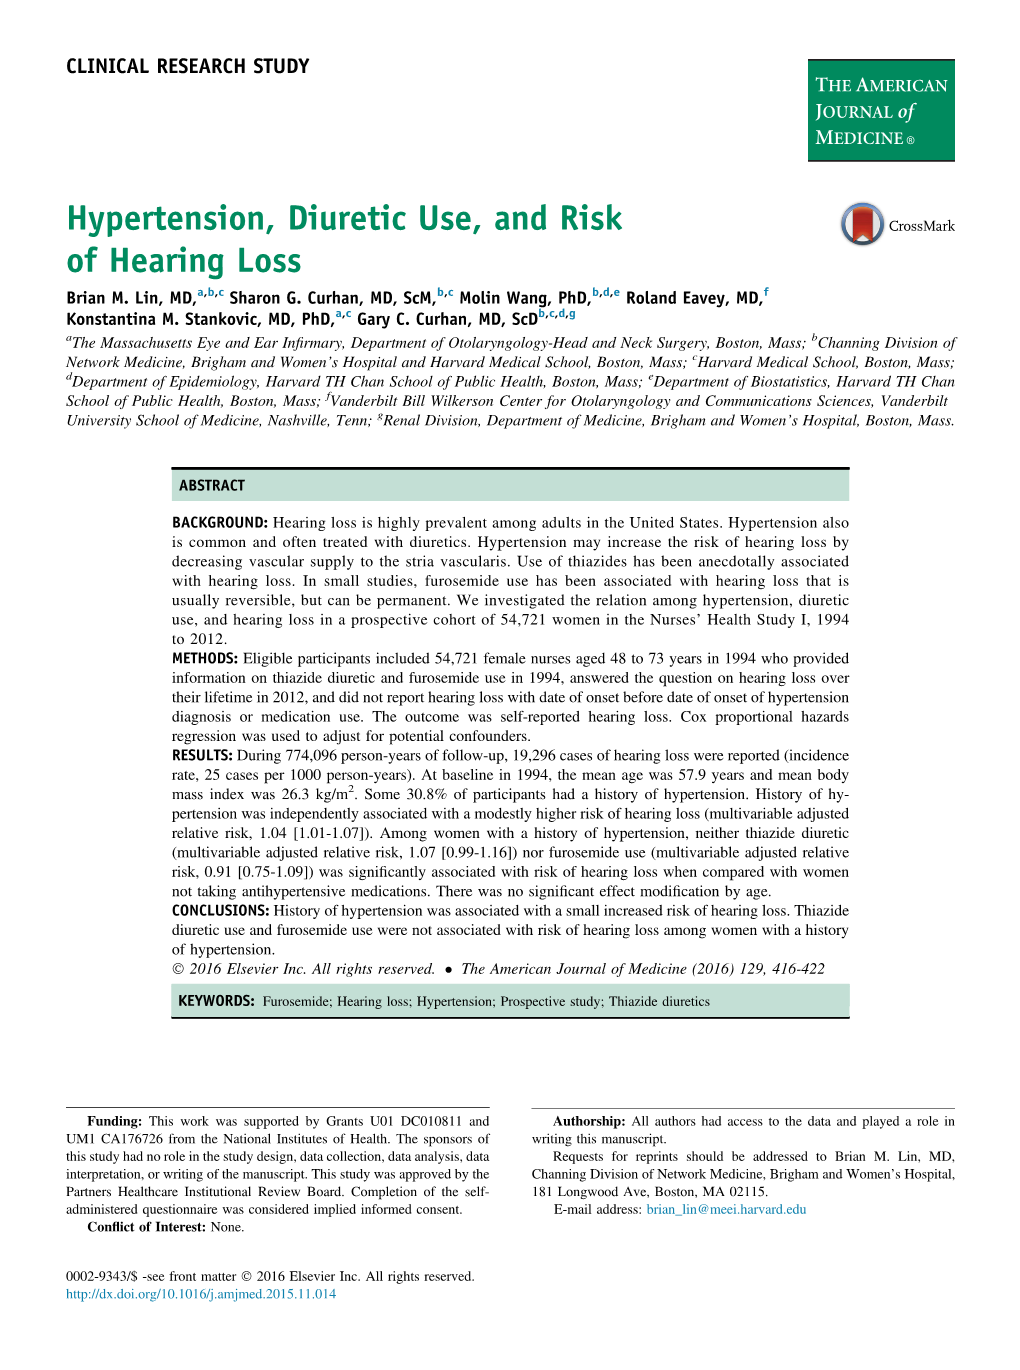 Hypertension, Diuretic Use, and Risk of Hearing Loss Brian M